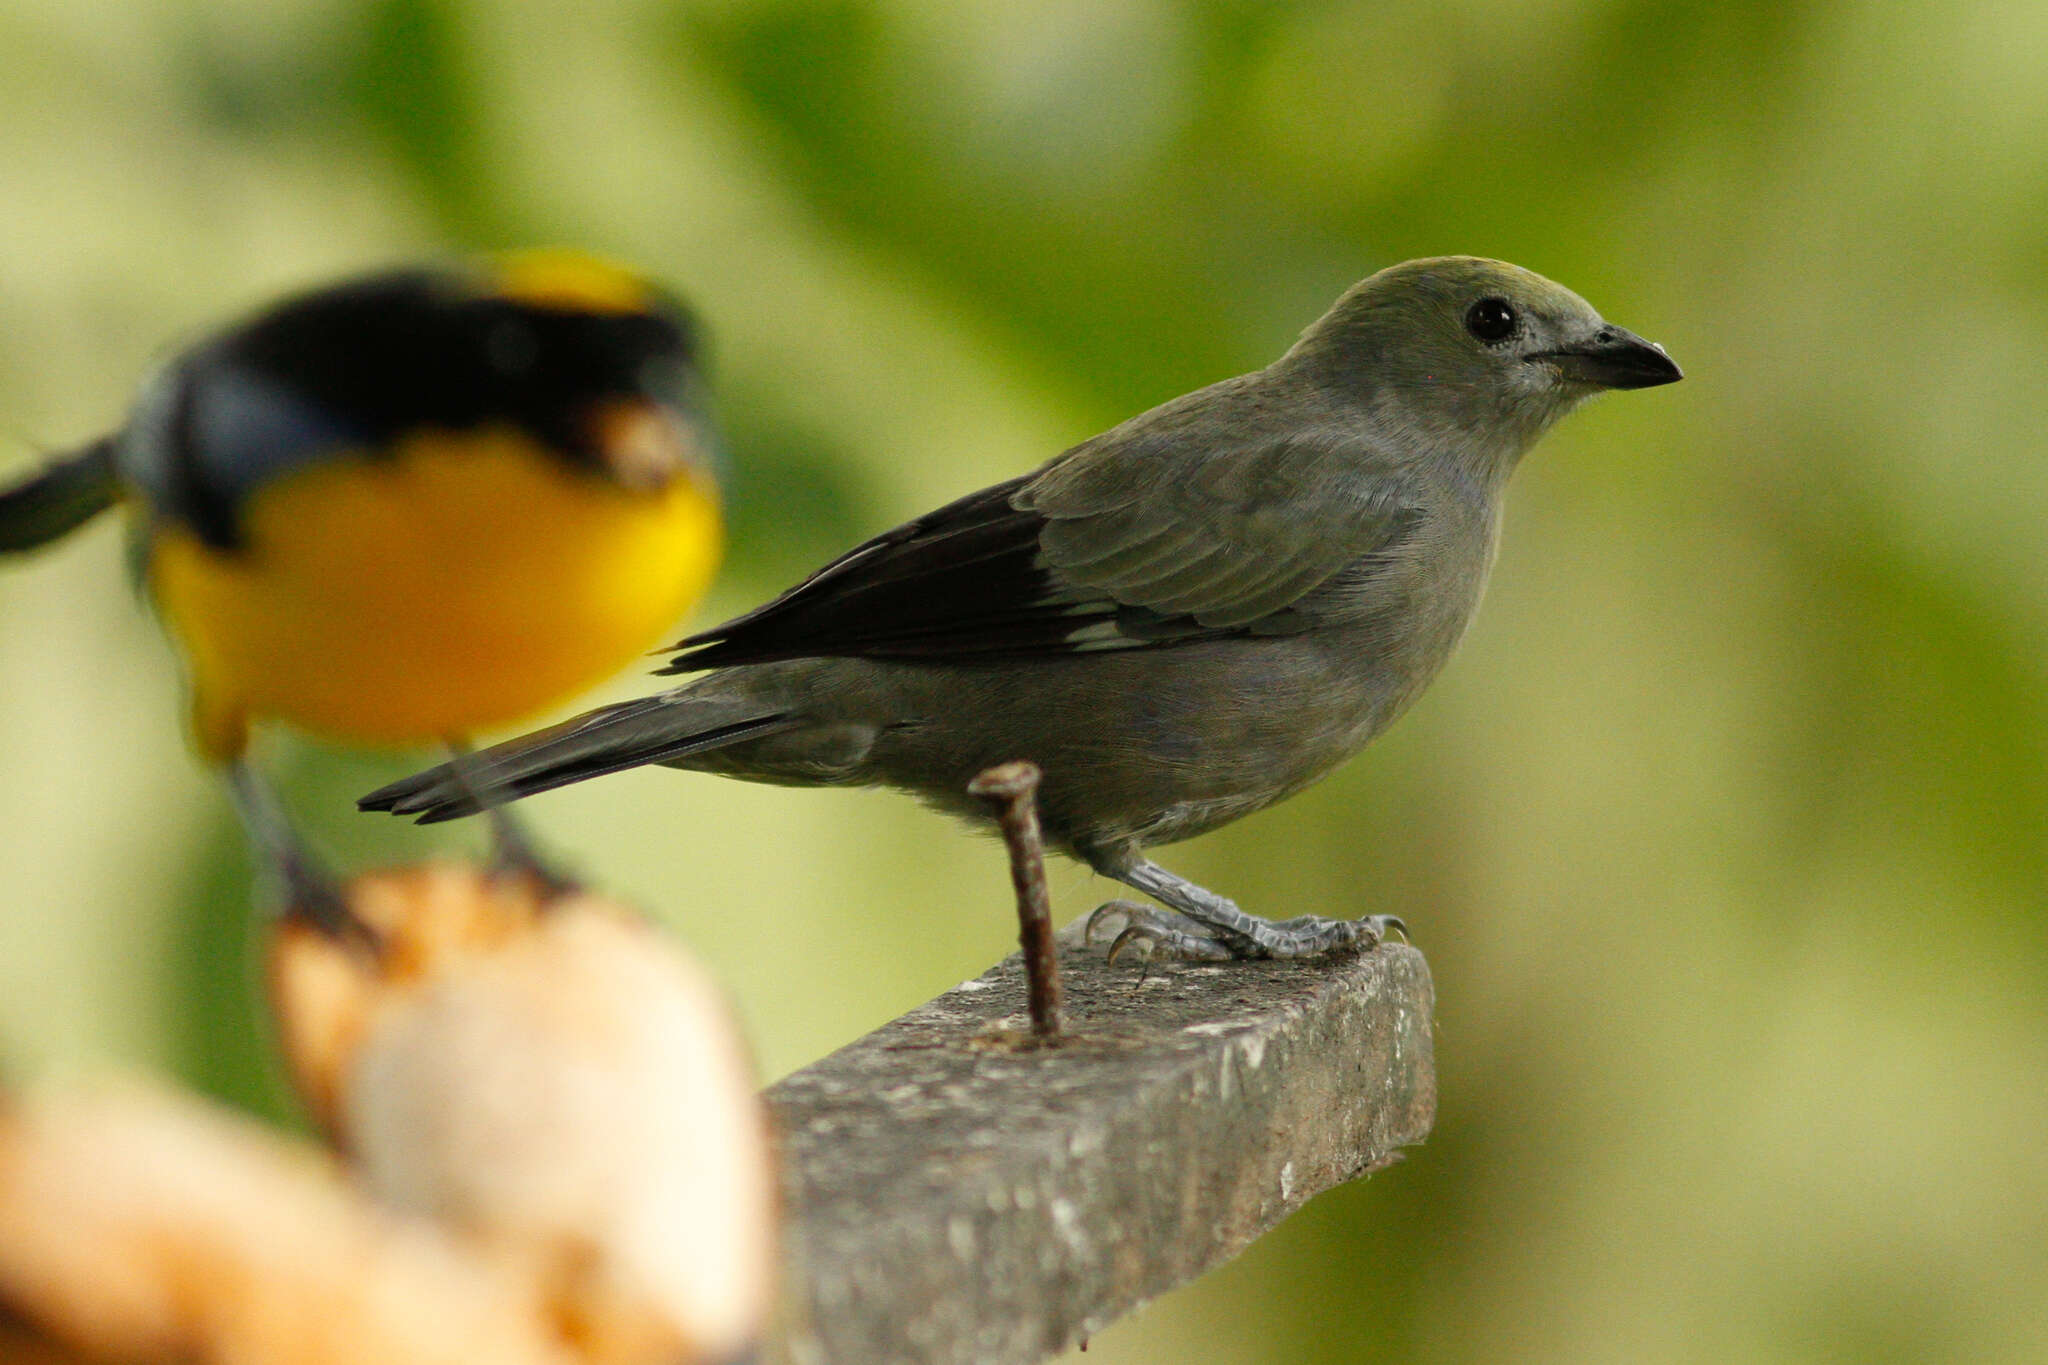 Image of Palm Tanager